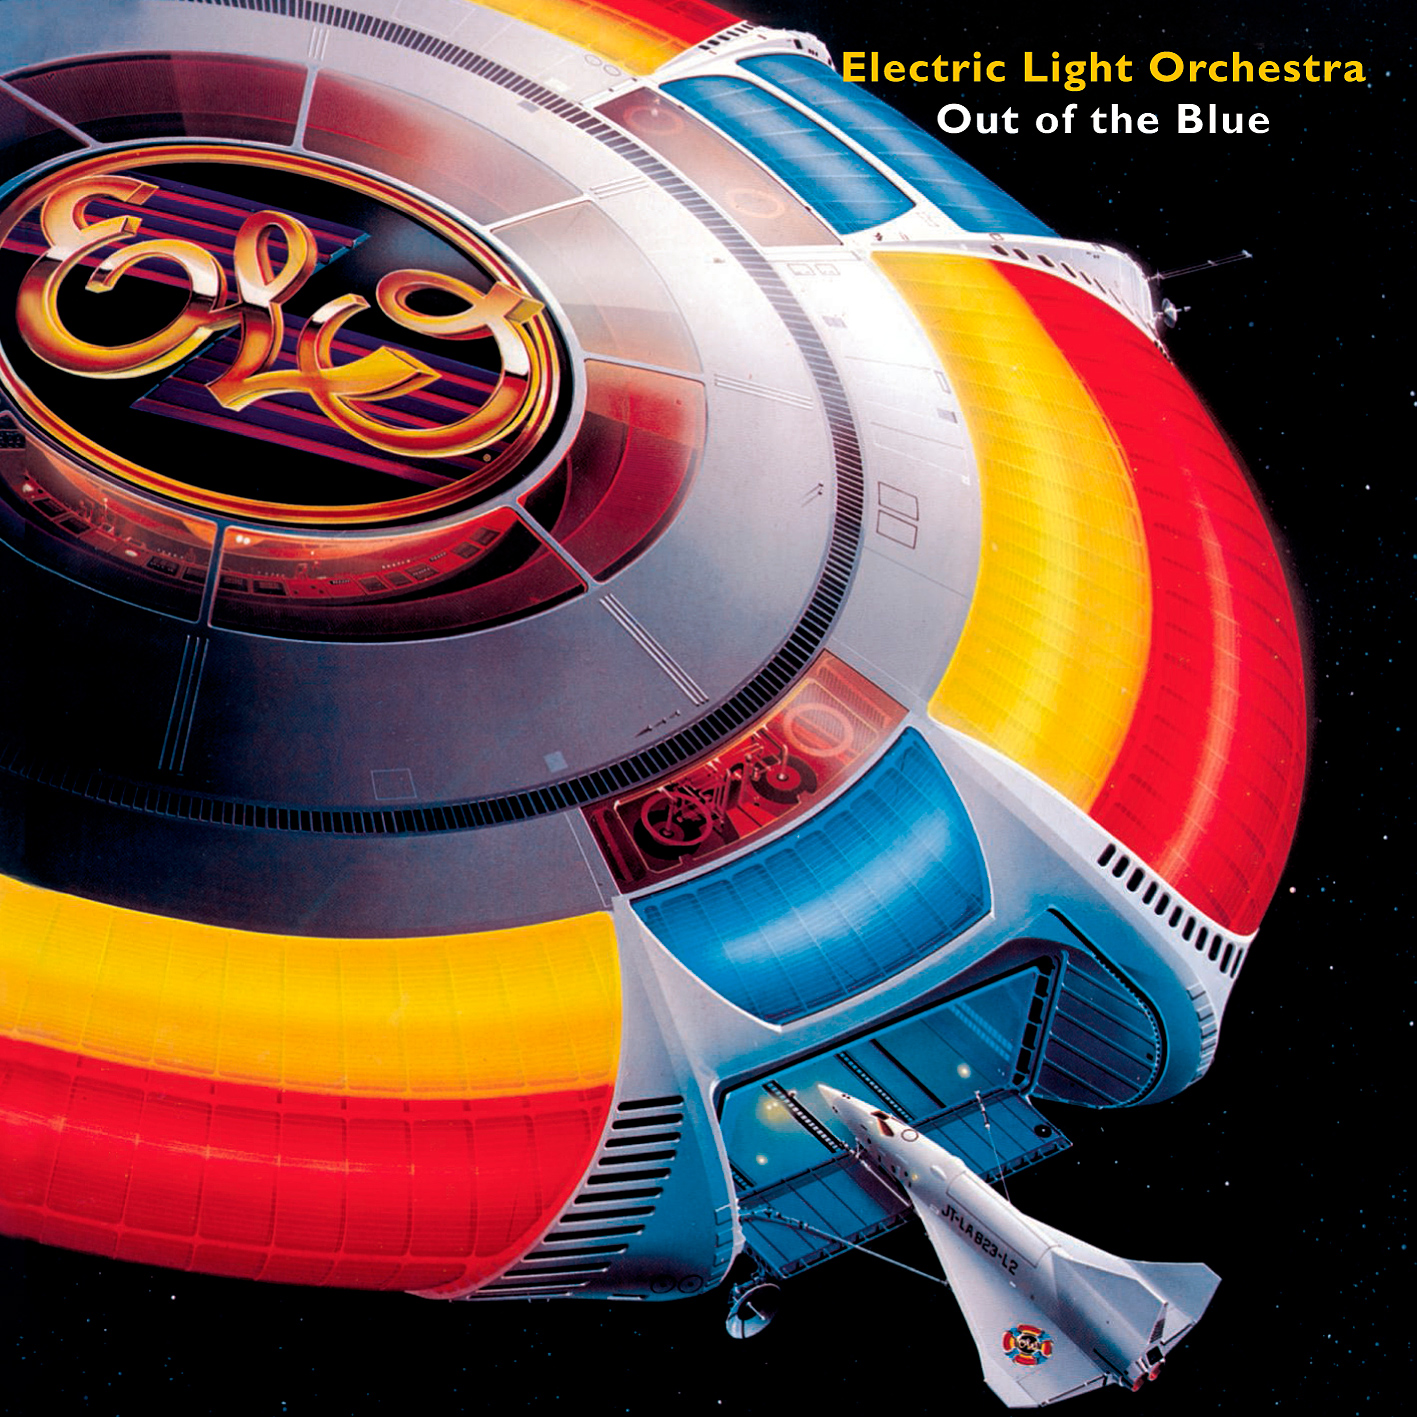 Electric Light Orchestra – Out Of The Blue (1977/2015) [HDTracks FLAC 24bit/192kHz]